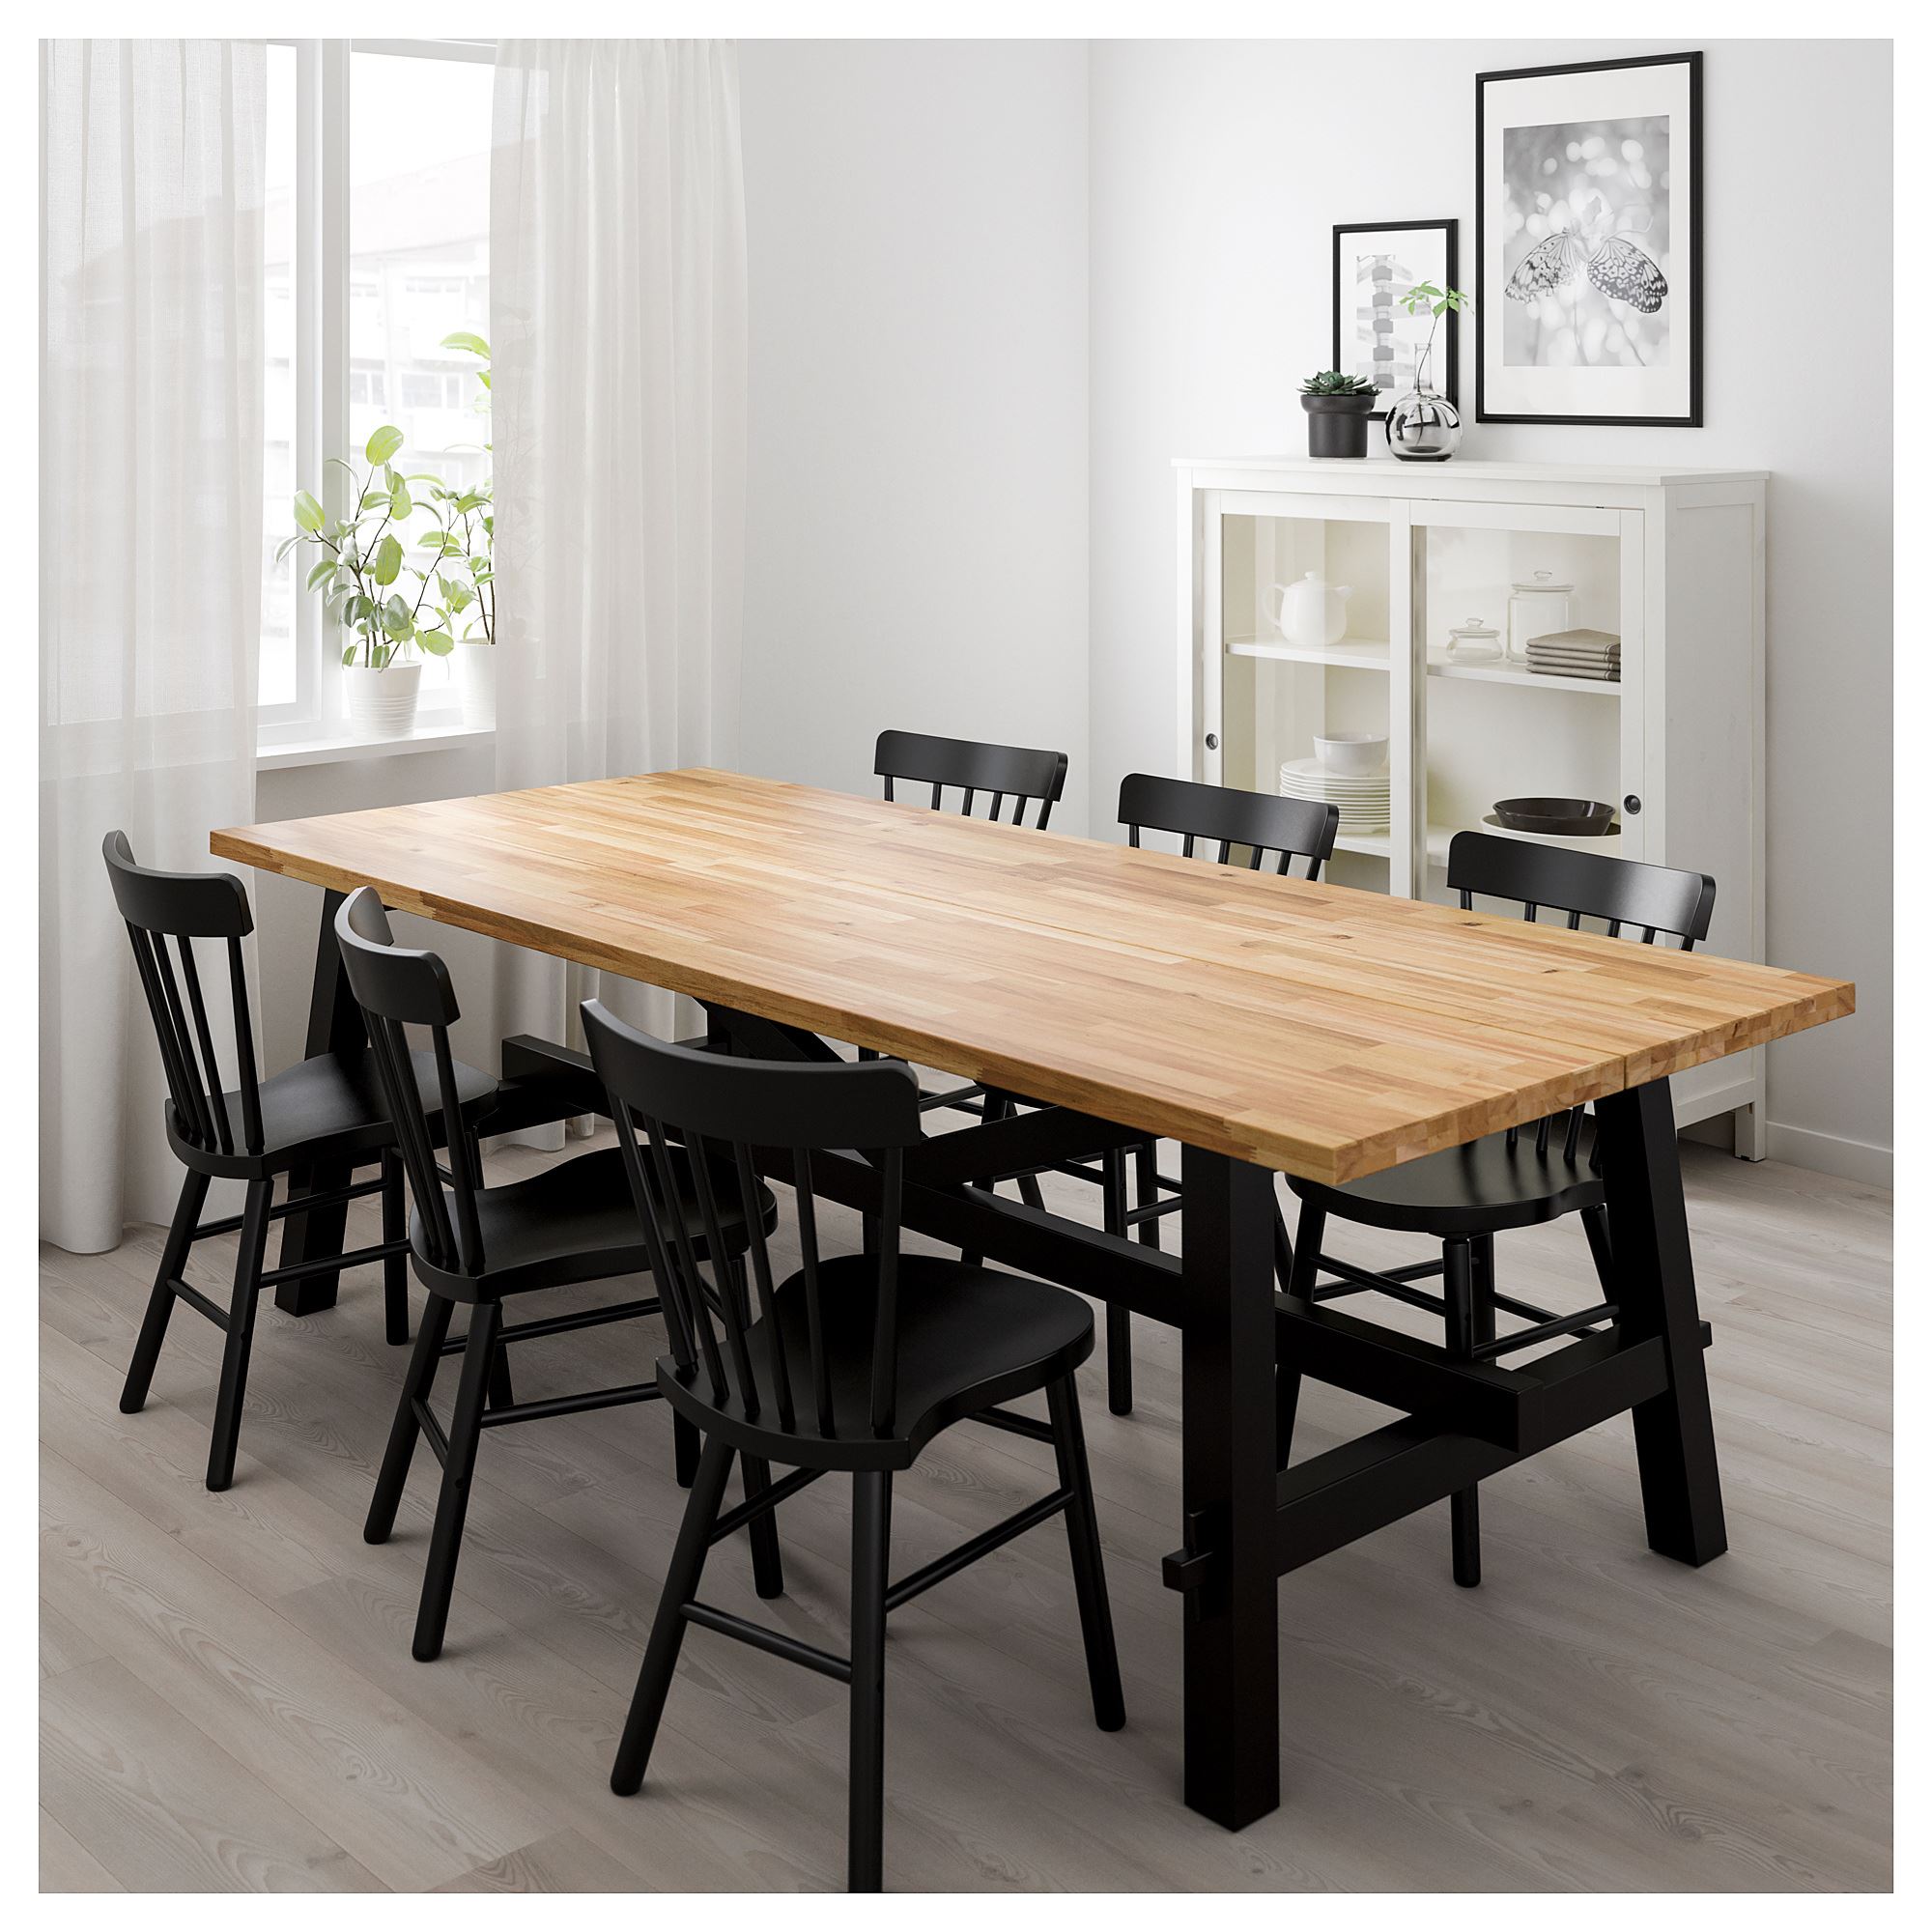 New Ikea Dining Room Sets 